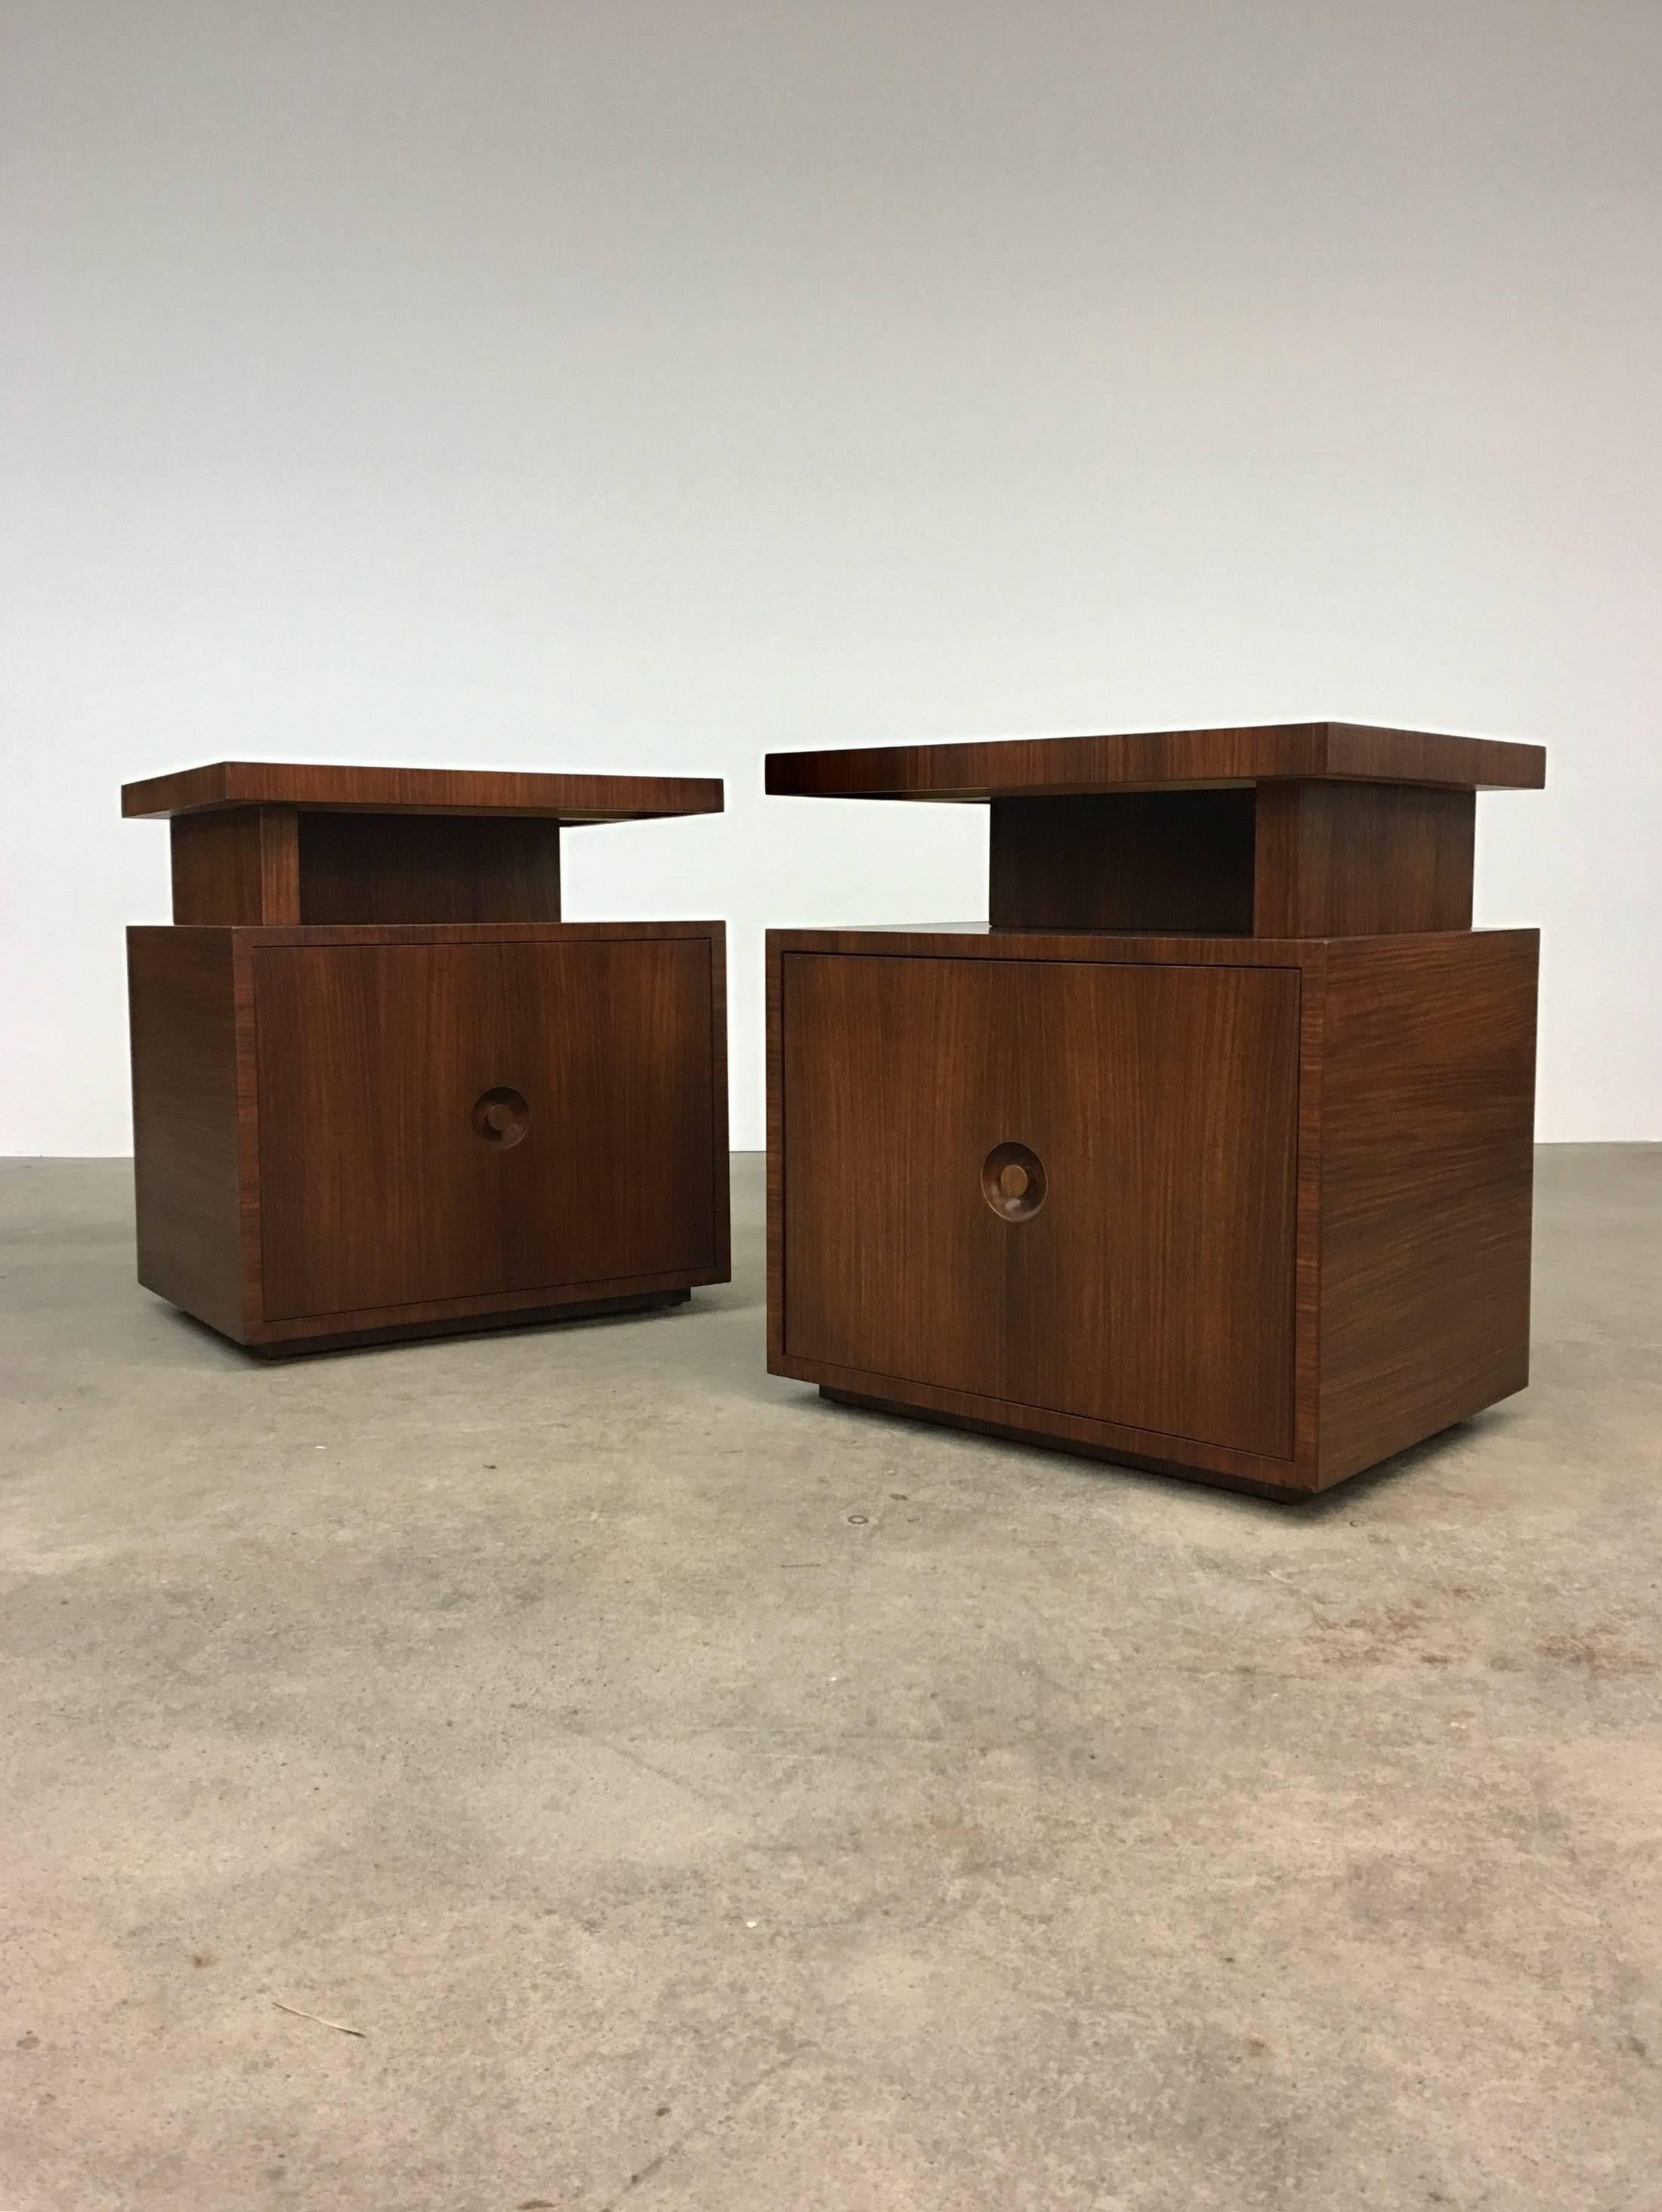 Pair of Andrew Szoeke end tables with floating tops in quarter-sawn rosewood, circa 1948. Single door with recessed, circular walnut knob opens to reveal an adjustable shelf. Fully signed with the Szoeke brass medallion. Could also be used as